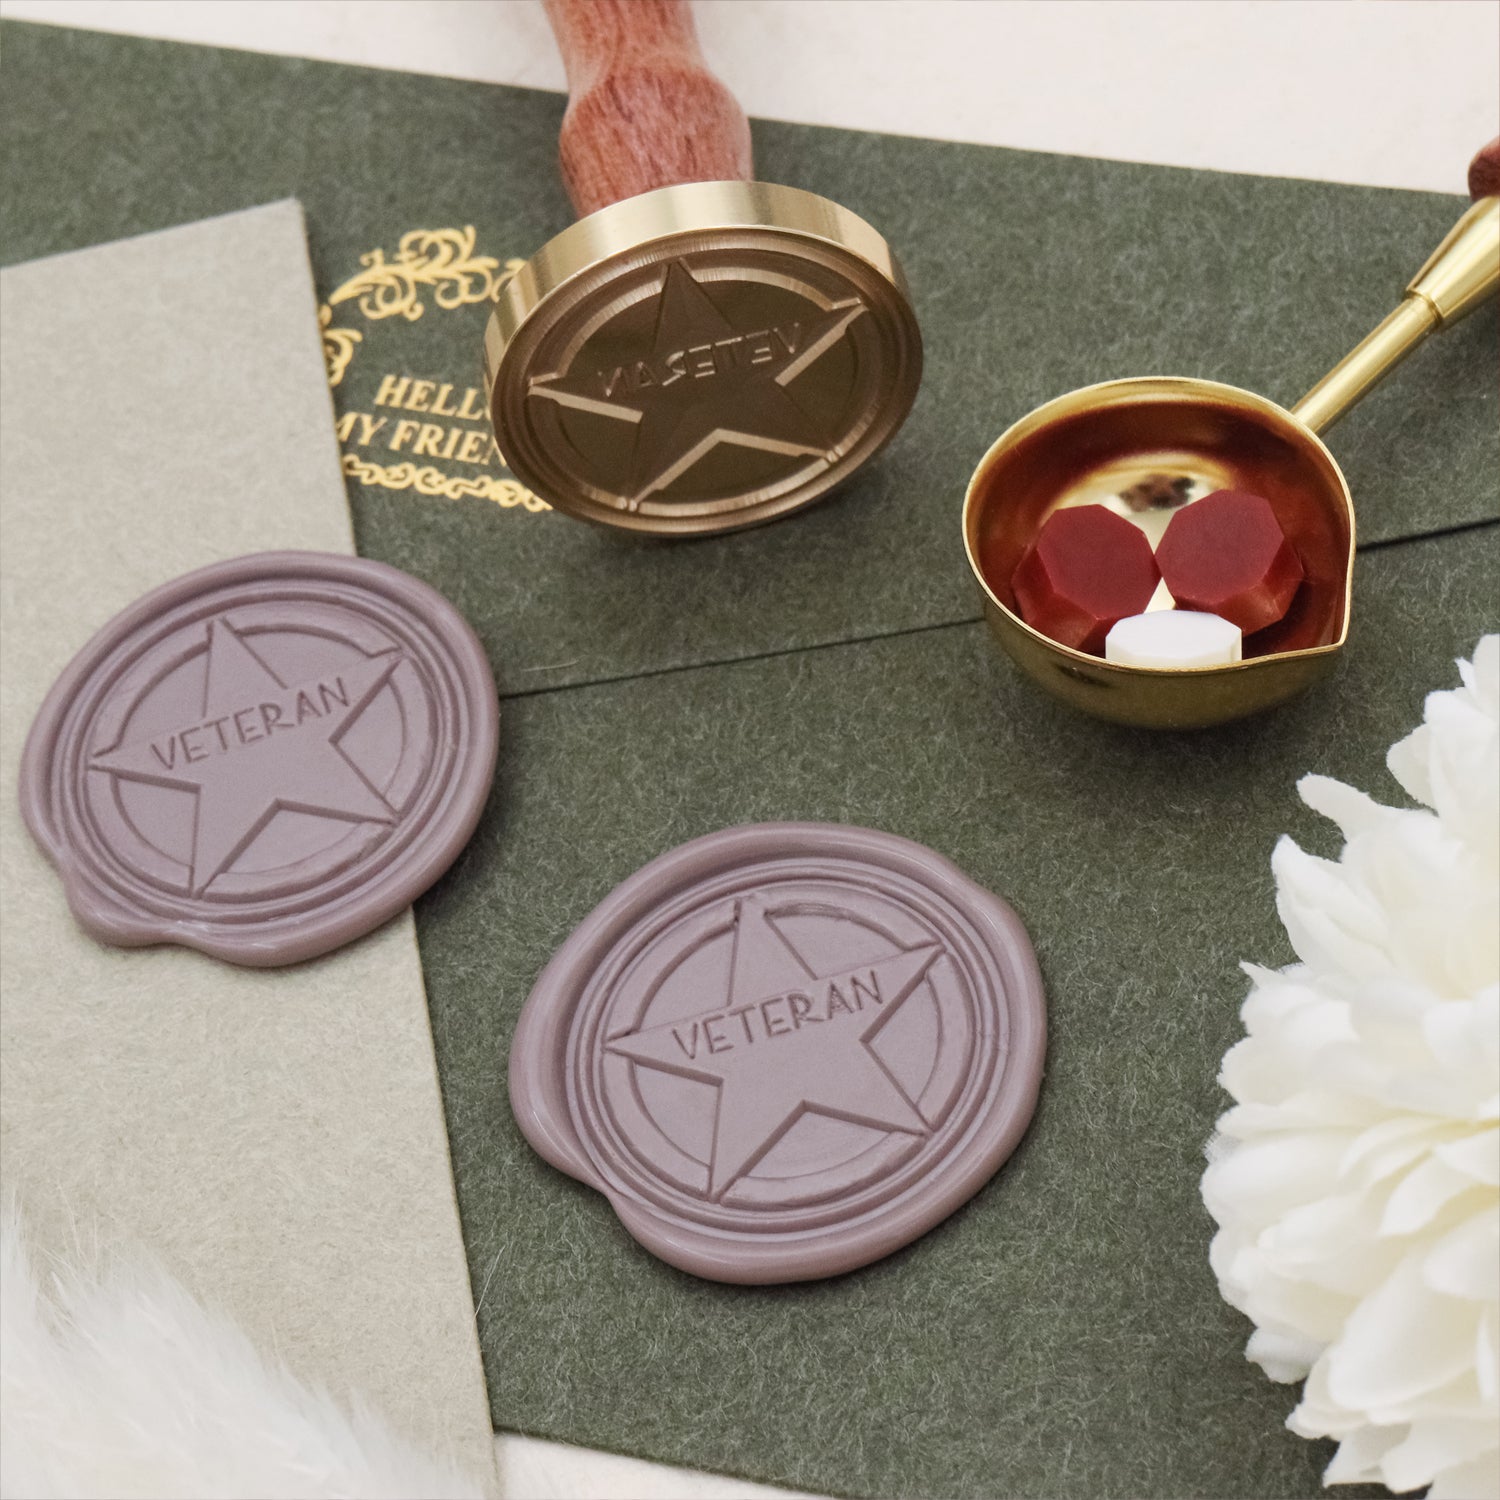 Ready Made Wax Seal Stamp - Military Art Wax Seal Stamp (12 Designs)